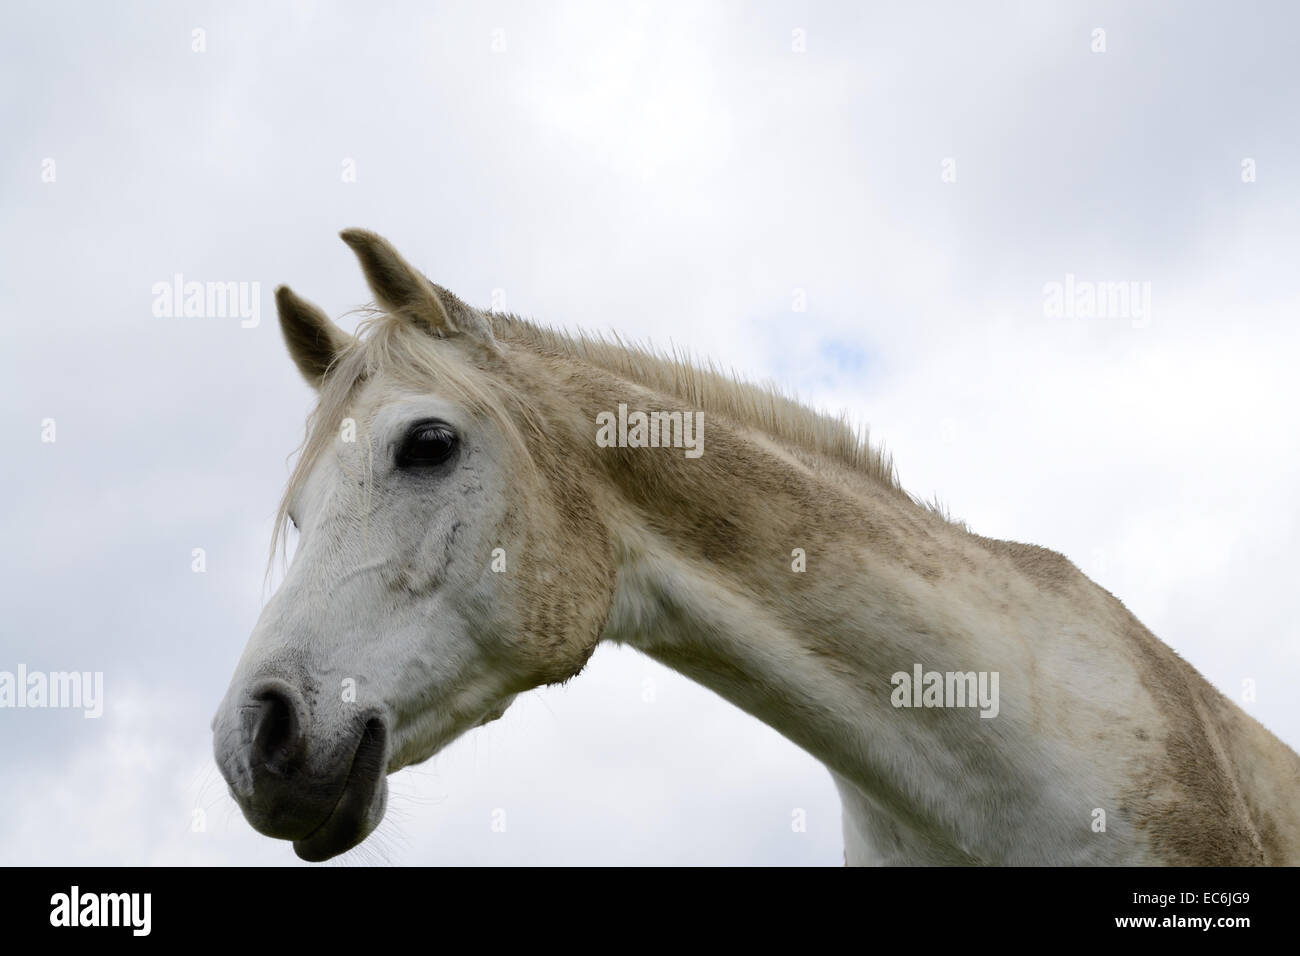 Horse head of a white horse Stock Photo